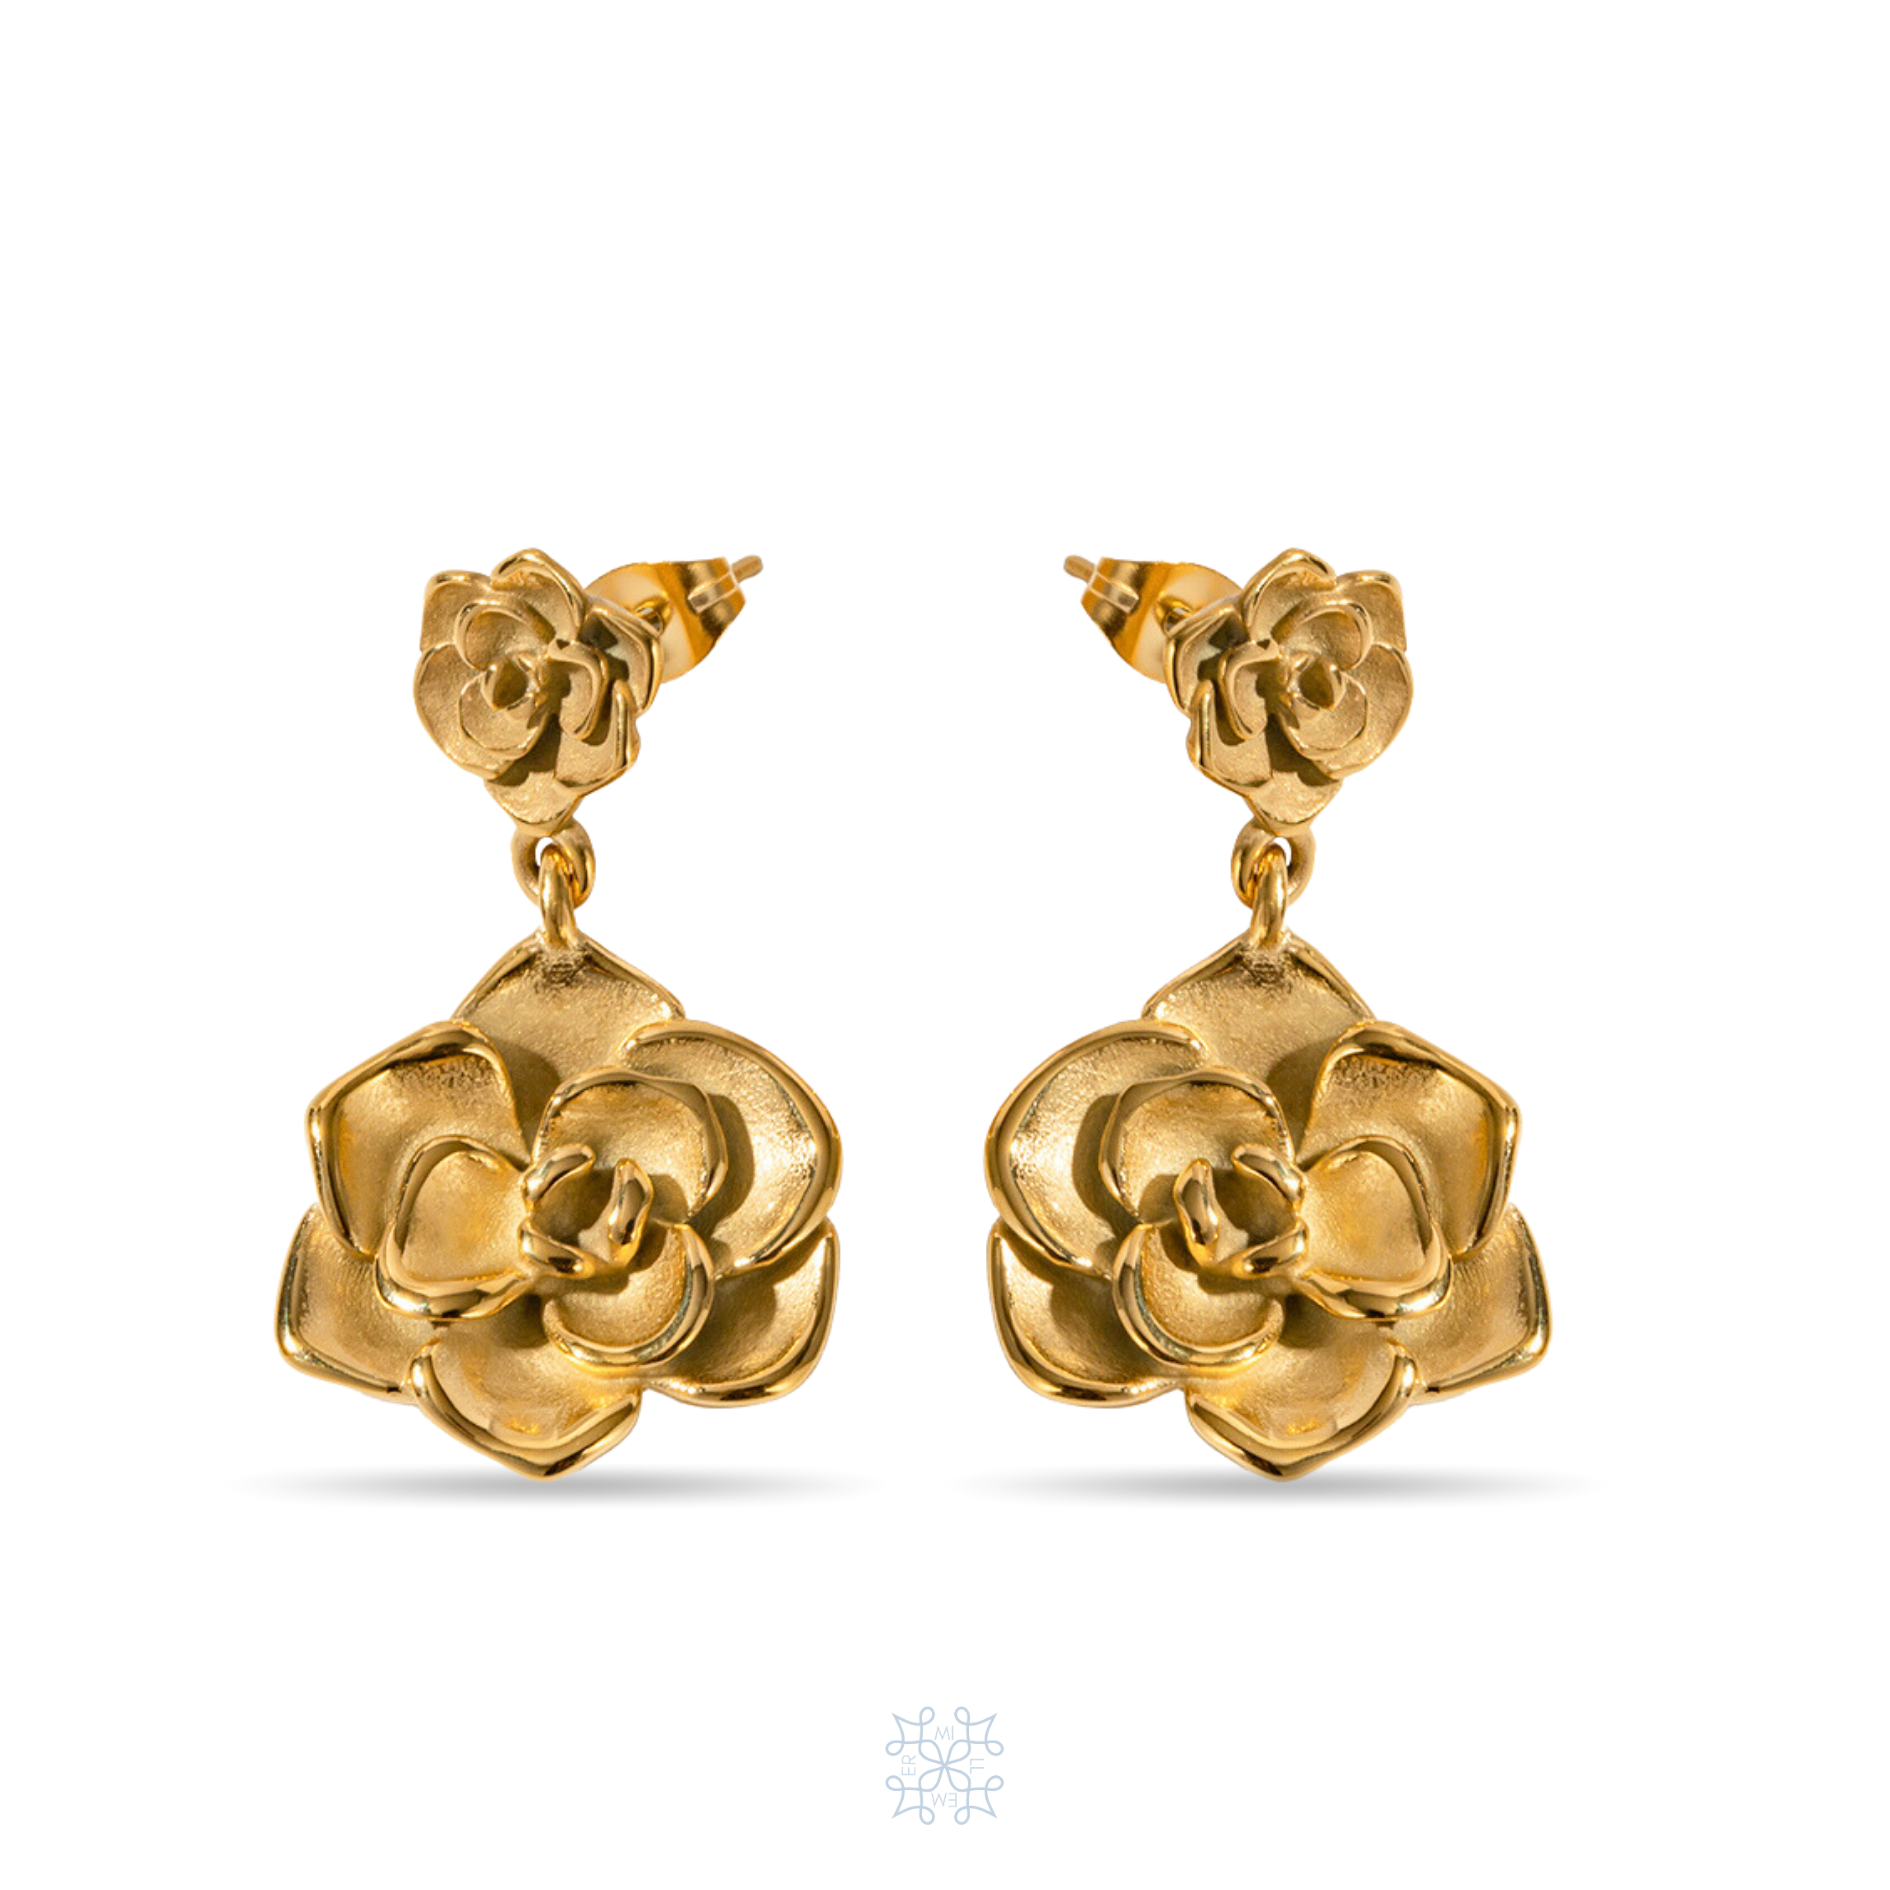 BLOOM Gold Drop Earrings. Rose shaped earrings, Small rose on top , bigger rose chained in the bottom part of the earrings.